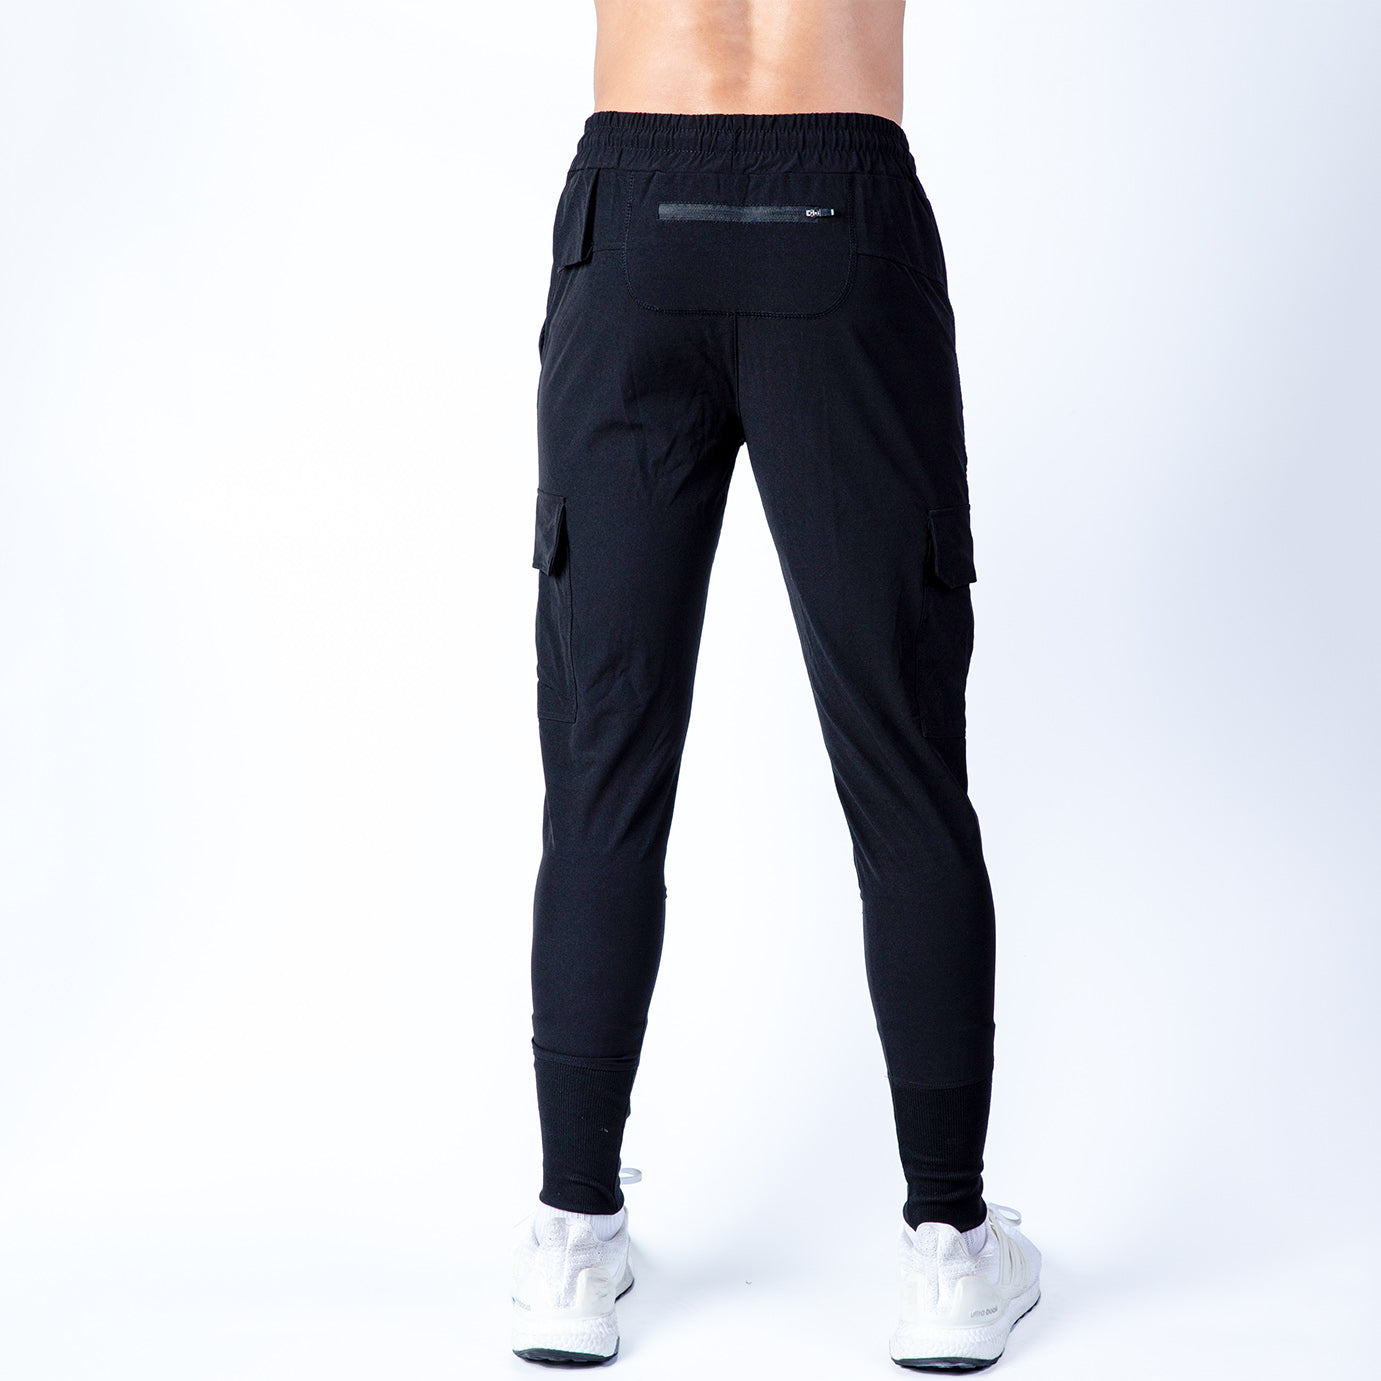 Kraasa Joggers Gym Pants for Men | Slim Fit Athletic Track Pants |Casual  Running Workout Pants with Pockets | 4 Way Lycra Trackpants Black Size L